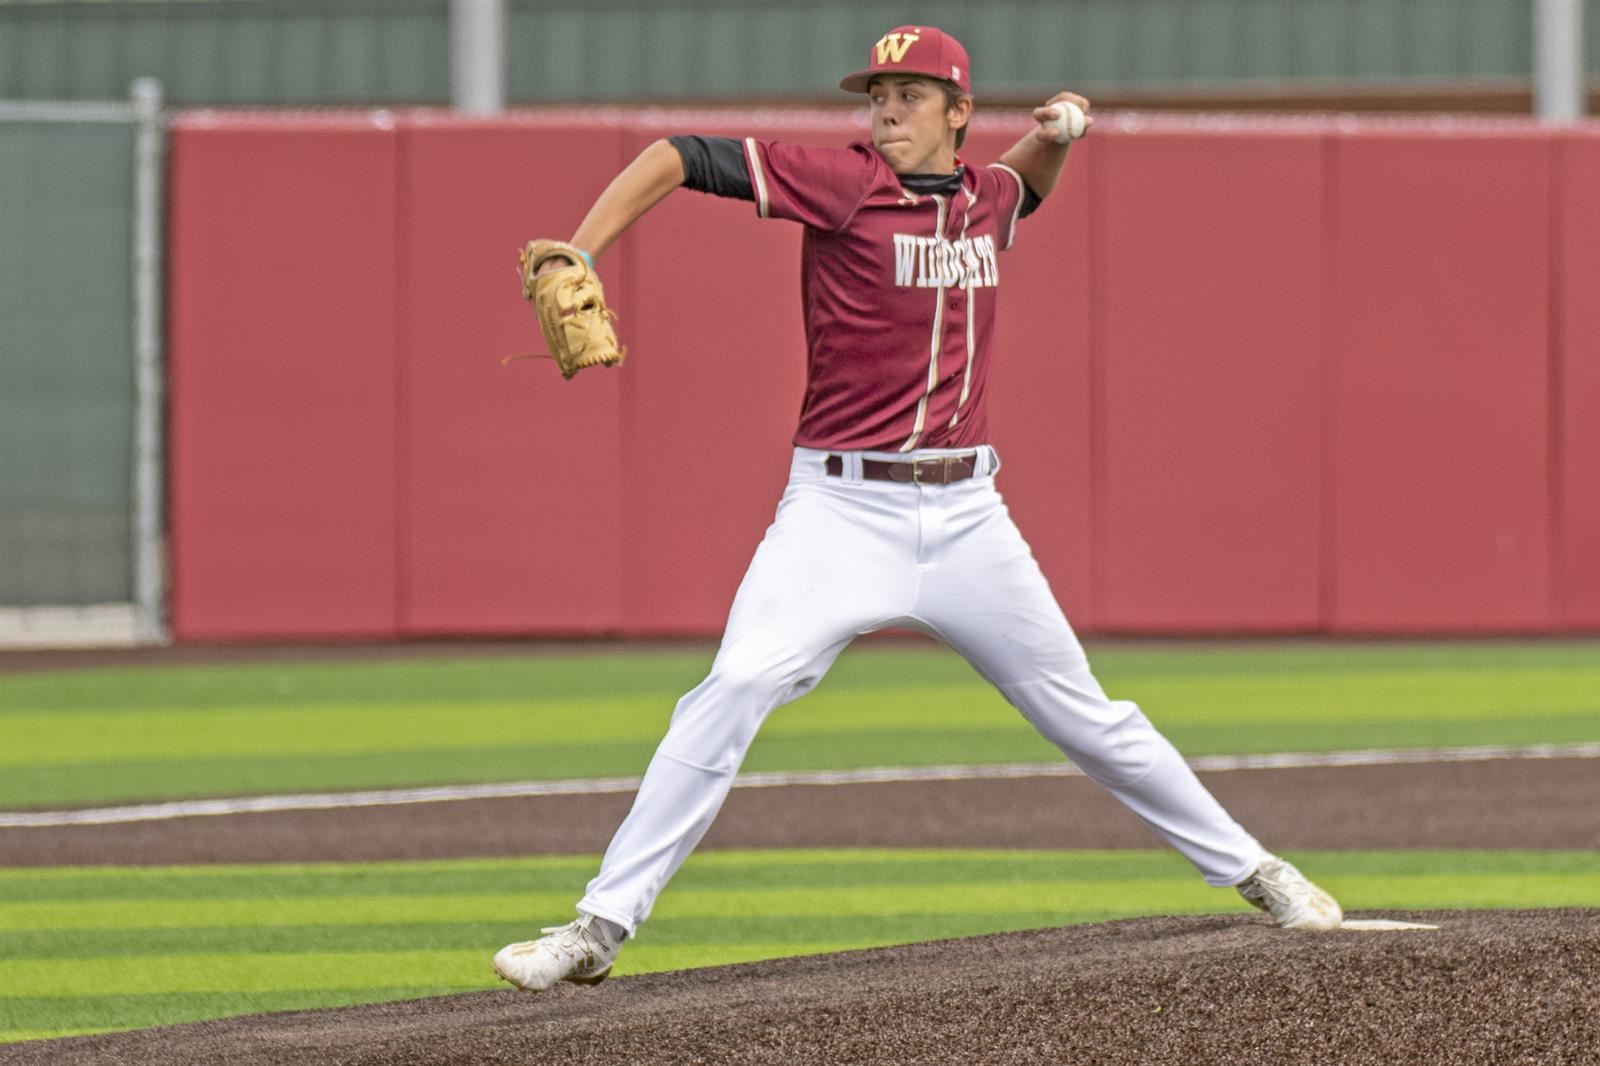 Cypress Woods High School junior Andrew Orr was unanimously named the District 16-6A Pitcher of the Year.